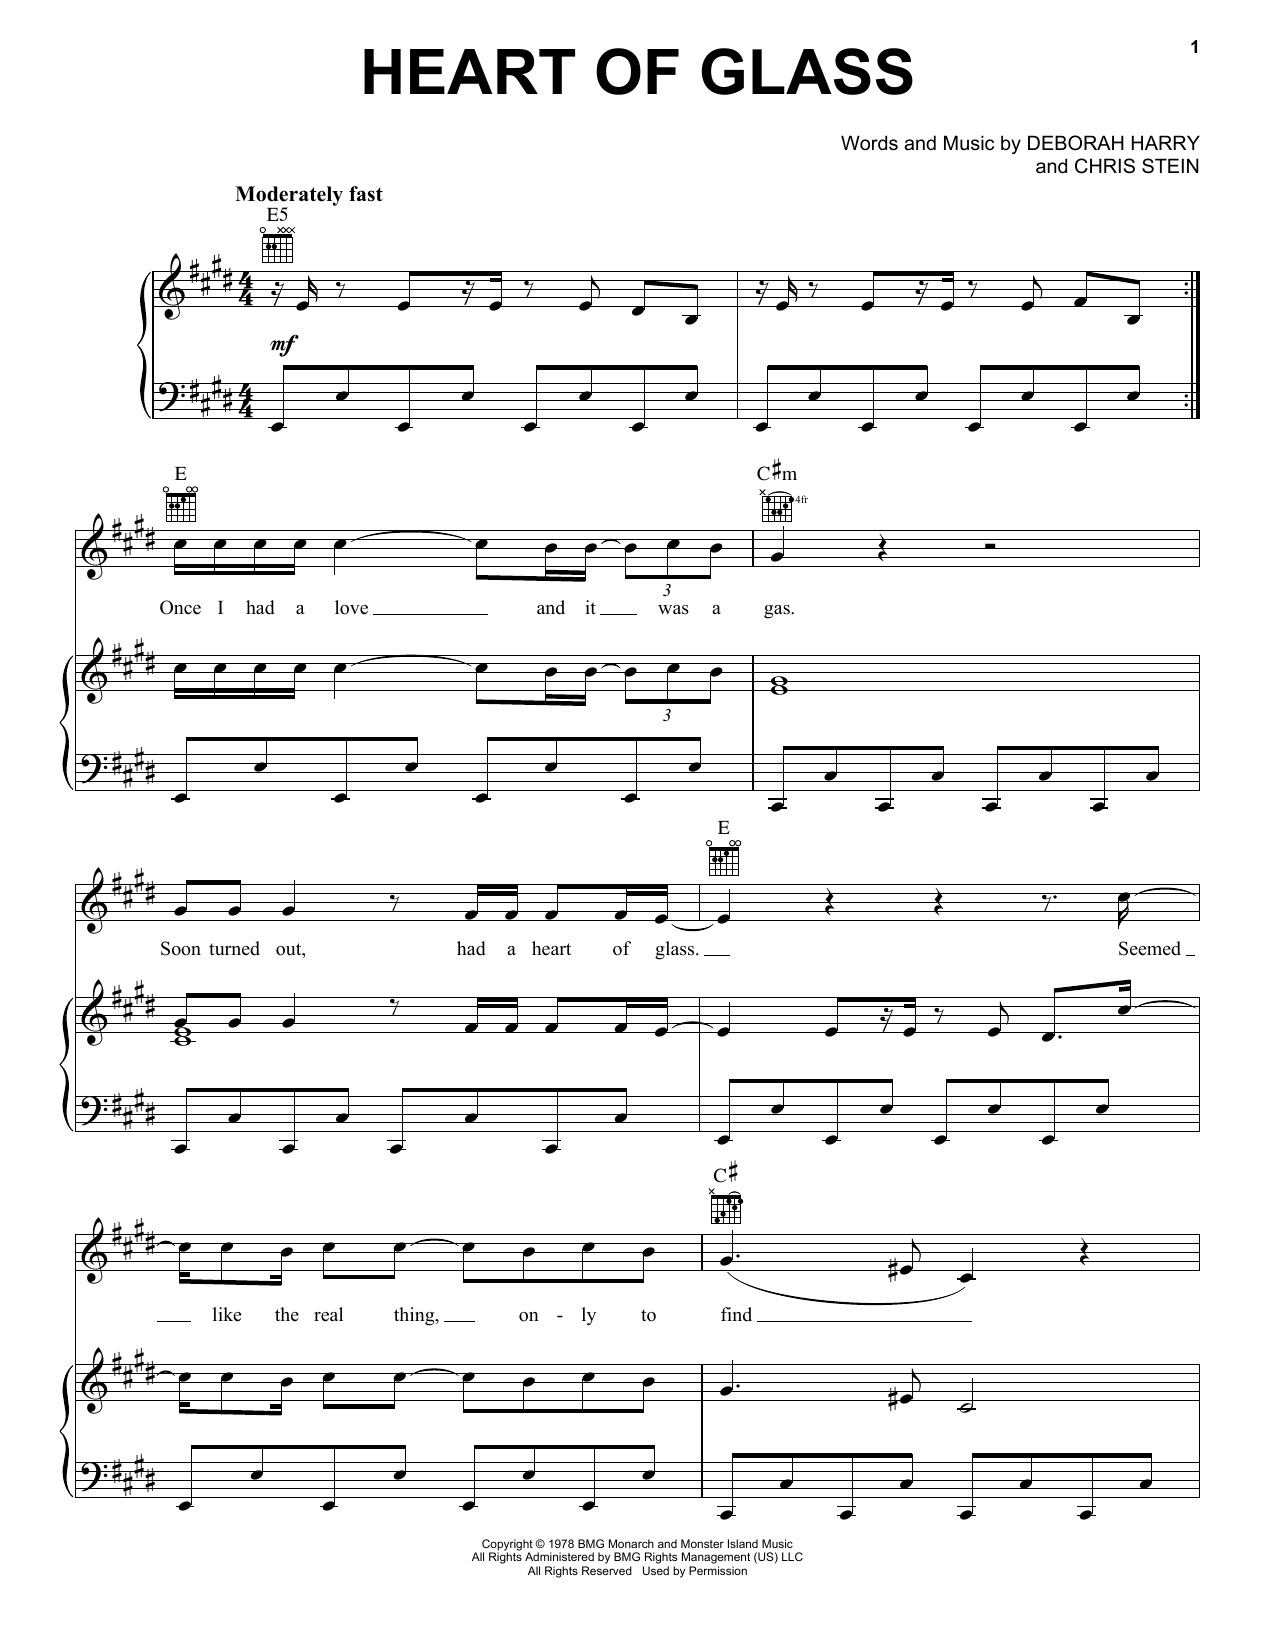 Blondie Heart Of Glass sheet music notes and chords. Download Printable PDF.